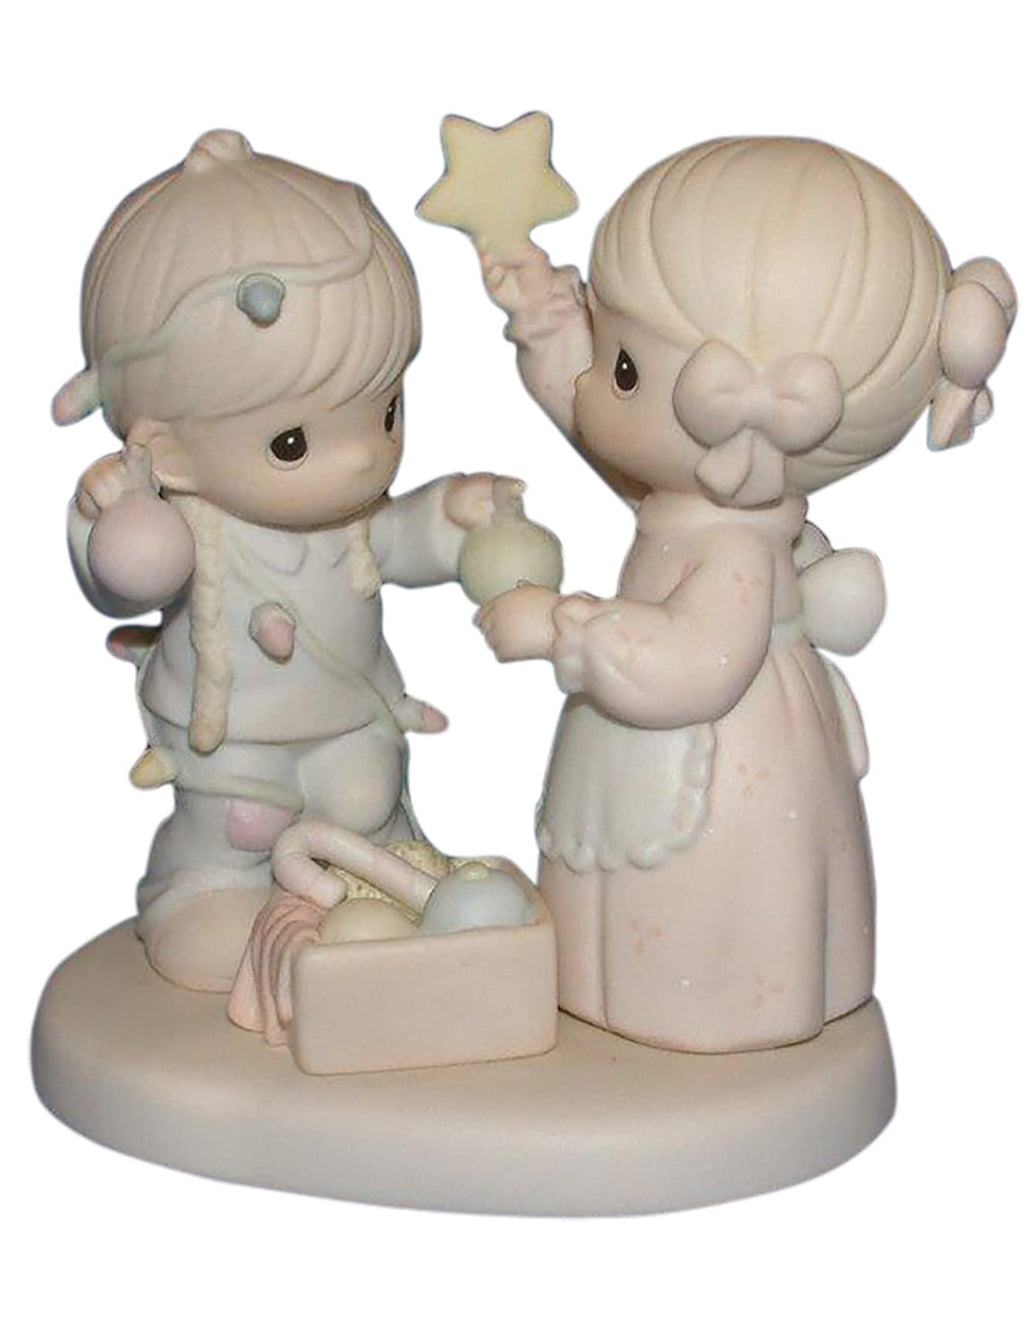 You Are My Favorite Star - Precious Moments Figurine 527378